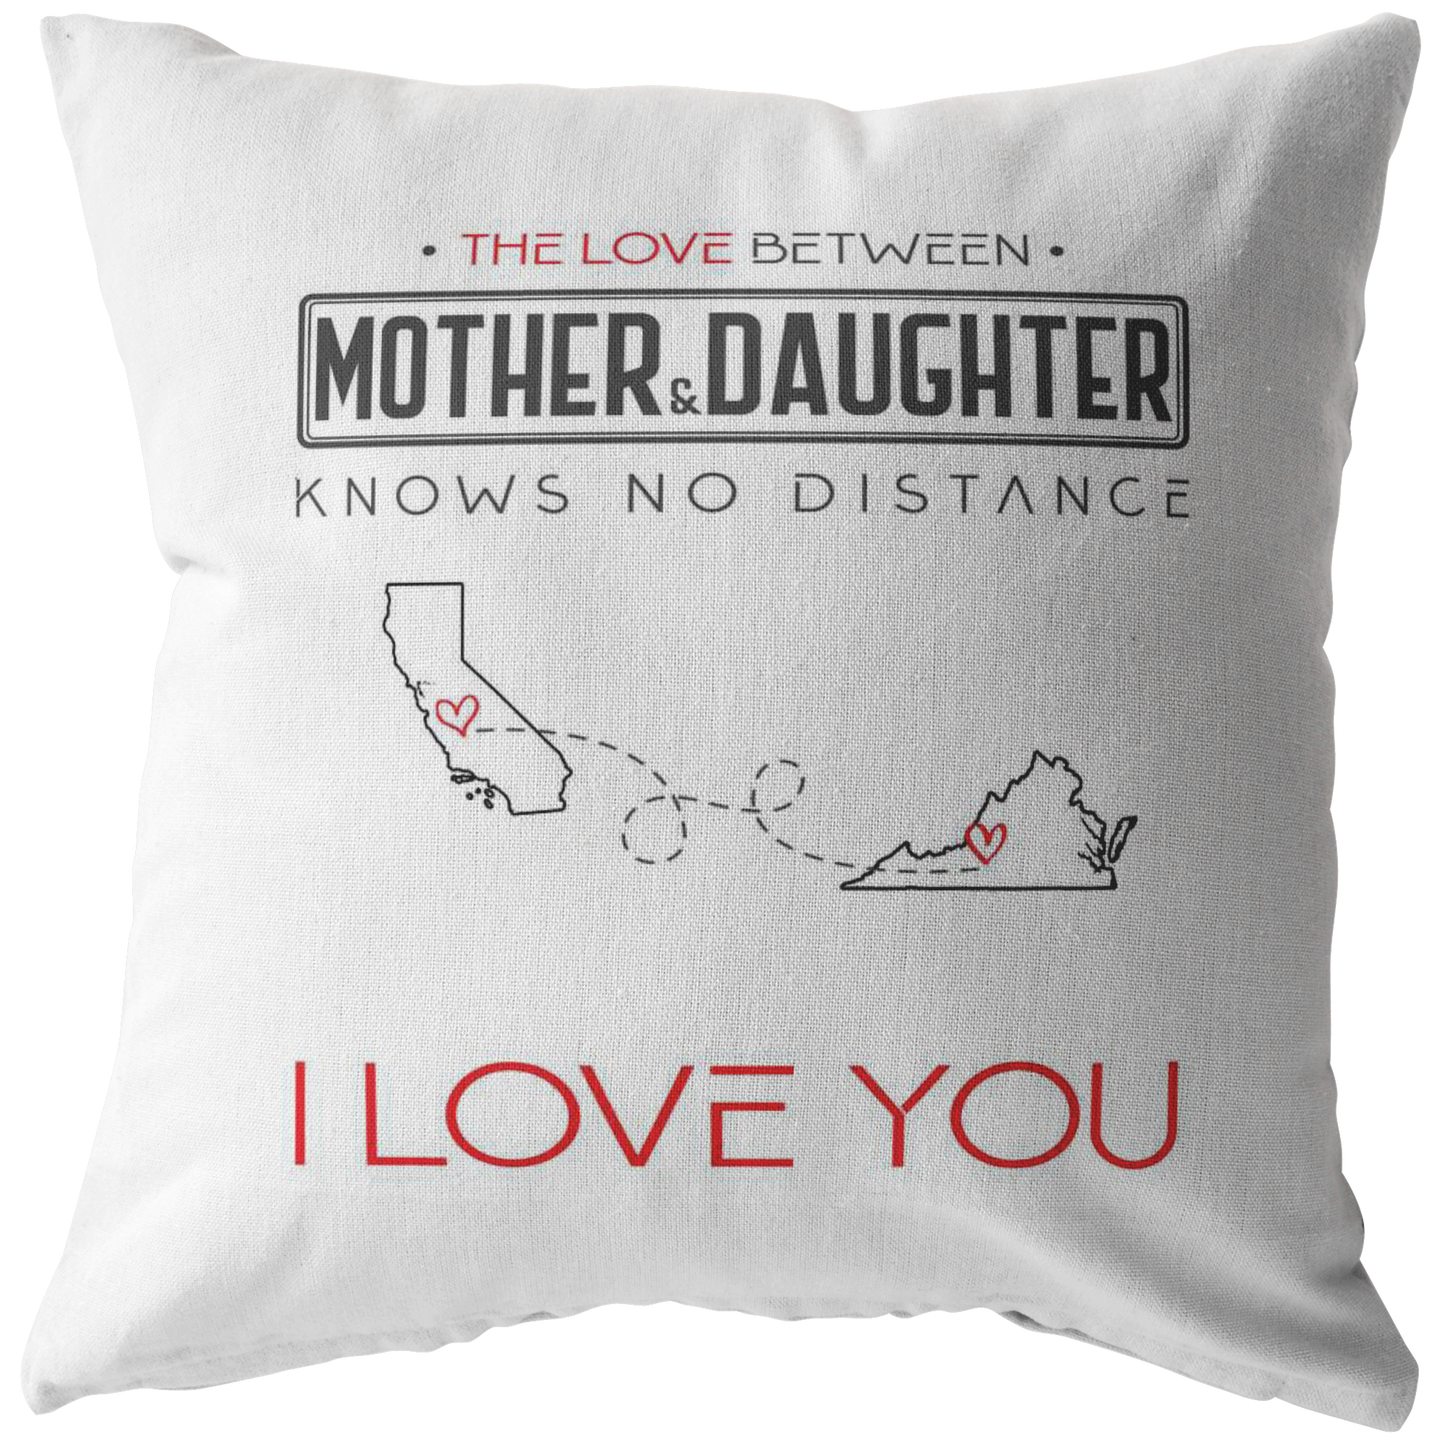 ND-PL21407914-sp-24319 - [ California | Virginia ]Mothers Day Gifts From Daughter - The Love Between Mother A